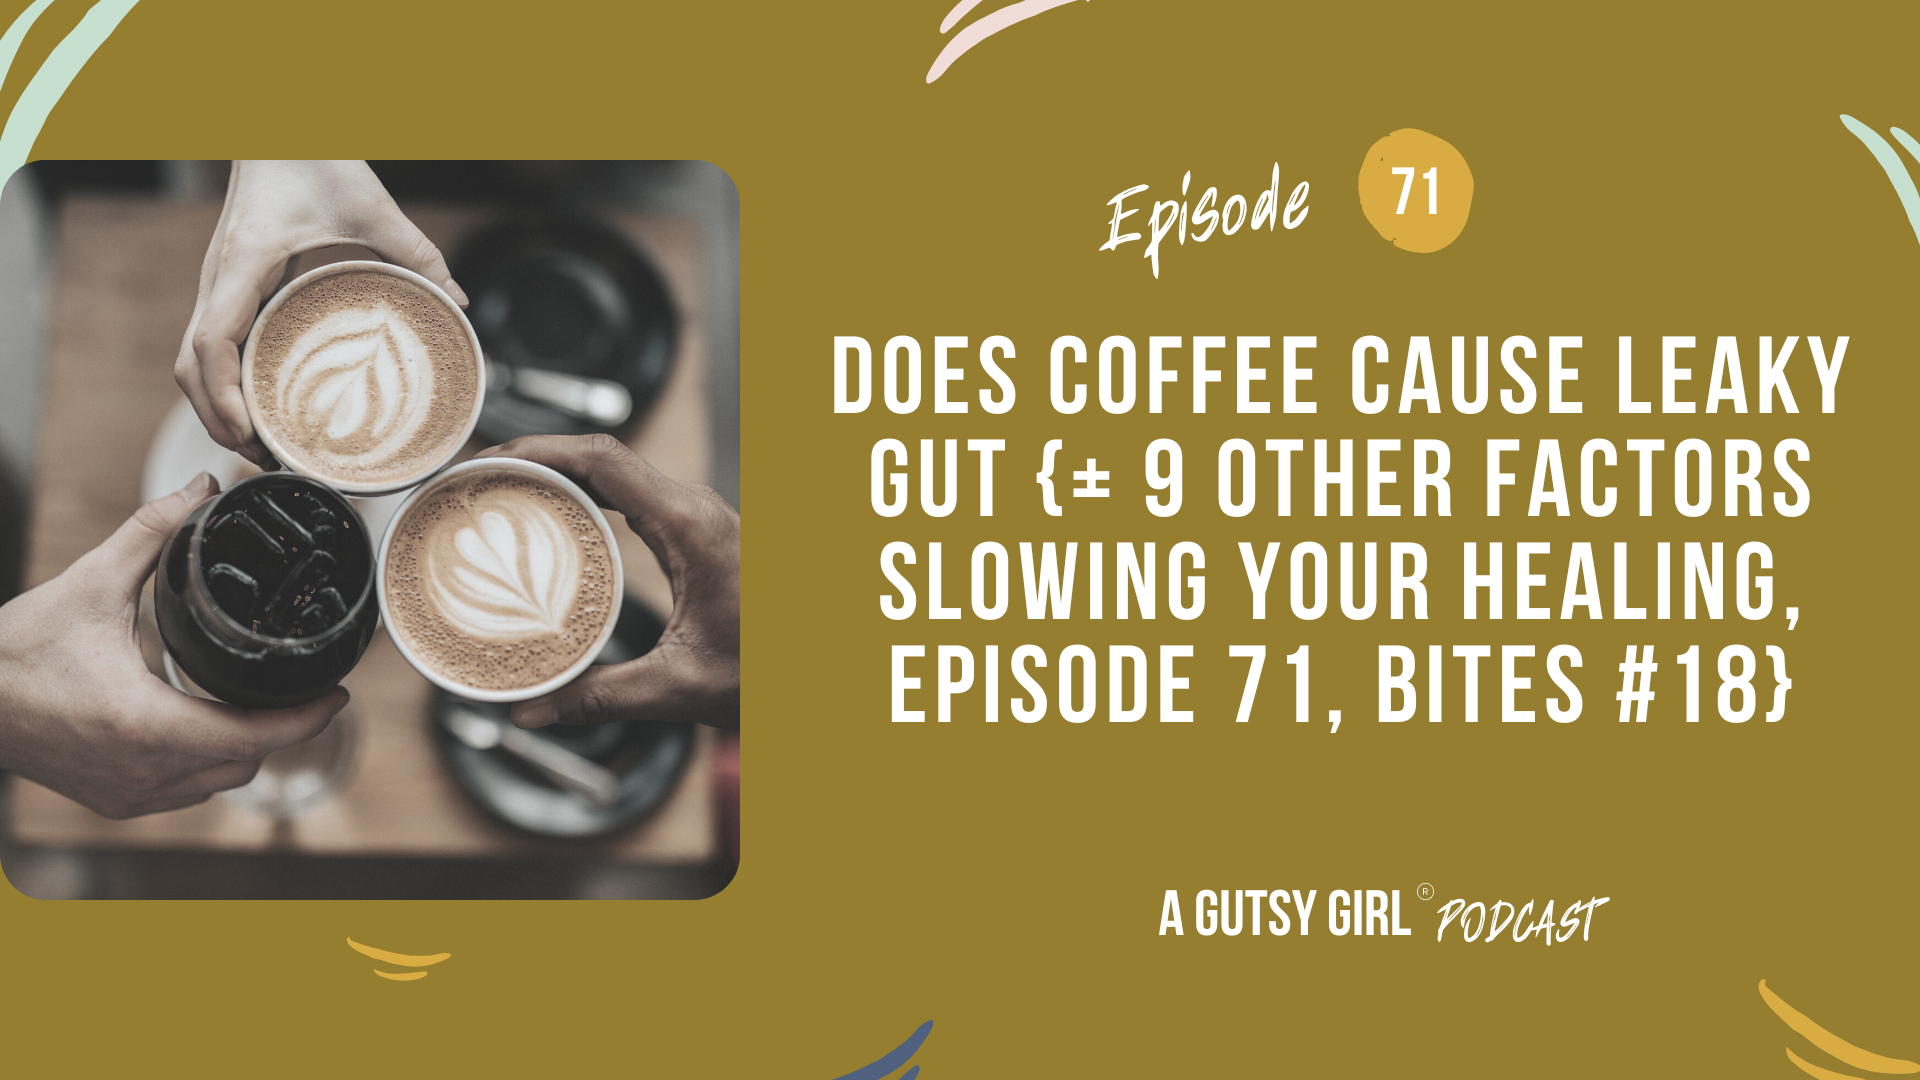 Does Coffee Cause Leaky Gut {+ 9 other factors slowing your healing, Episode 71, Bites #18}